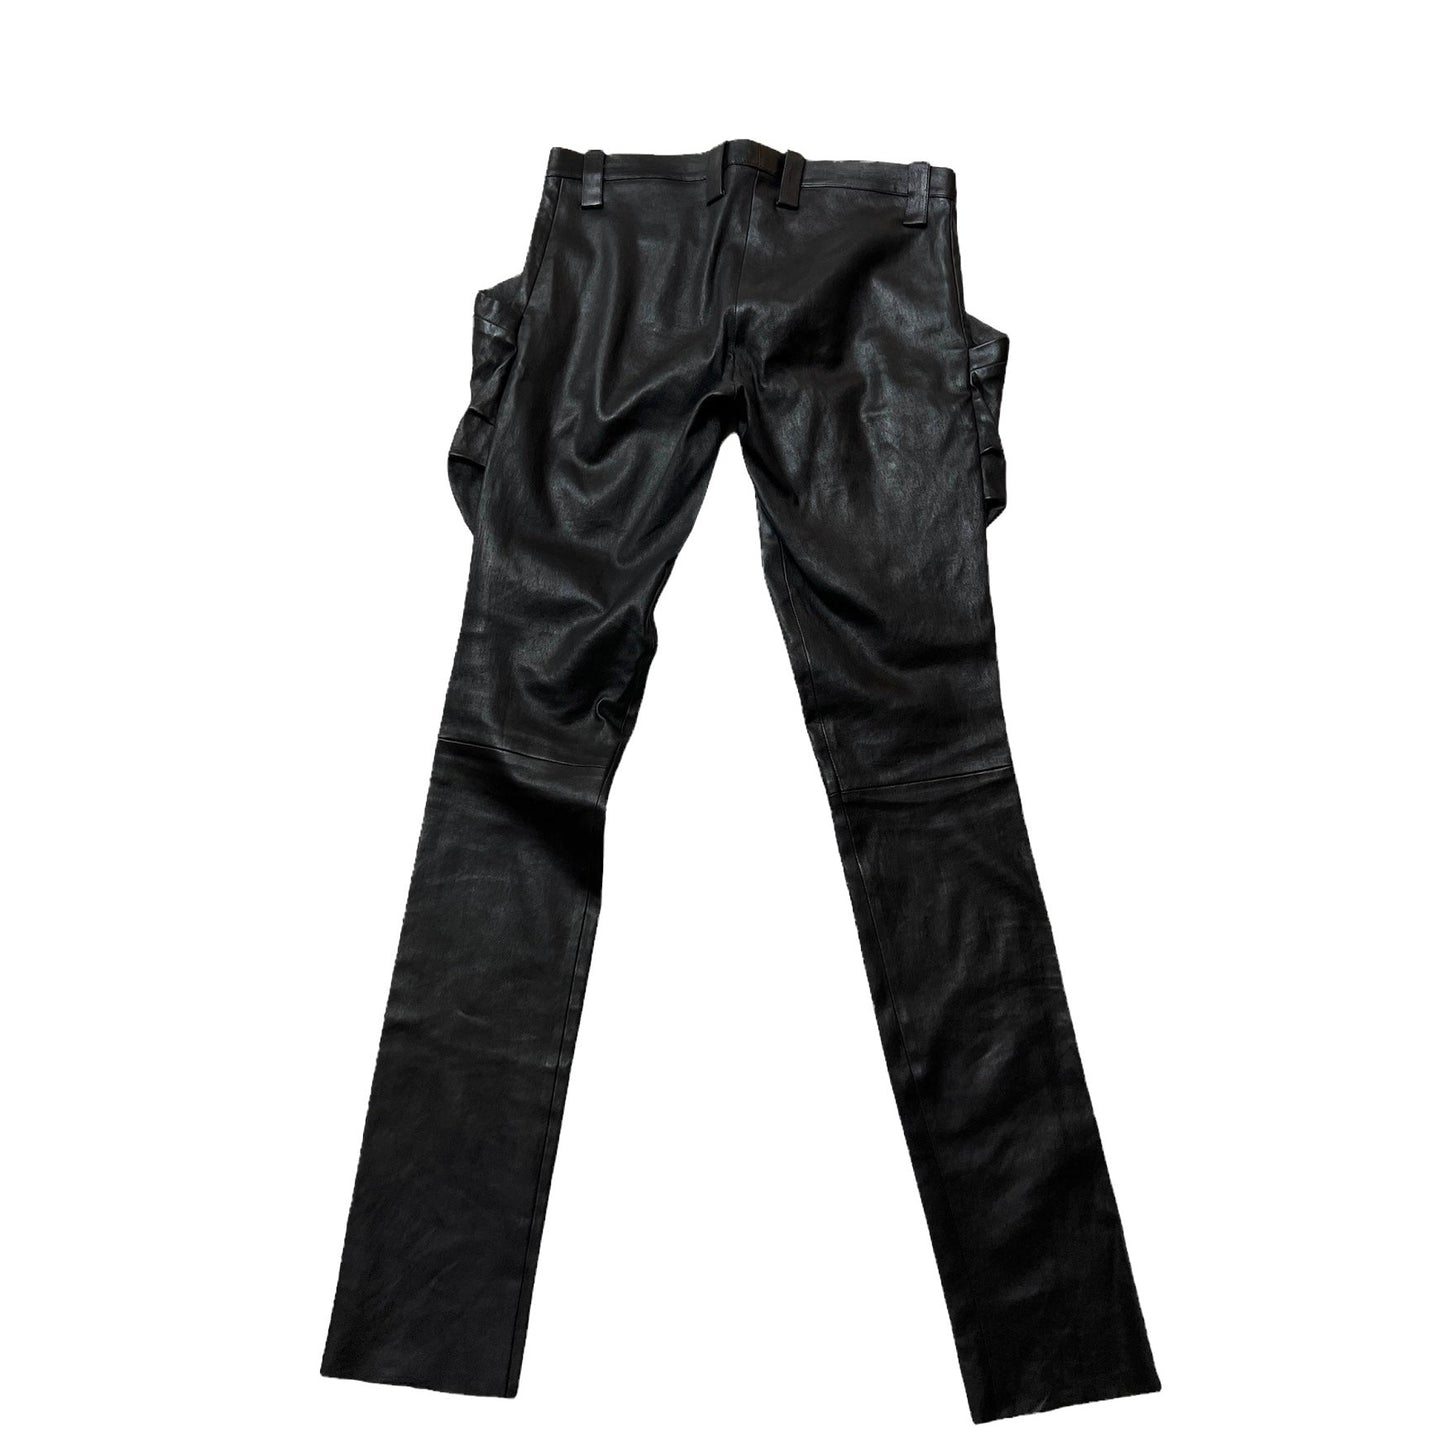 Black Leather Pants - Small